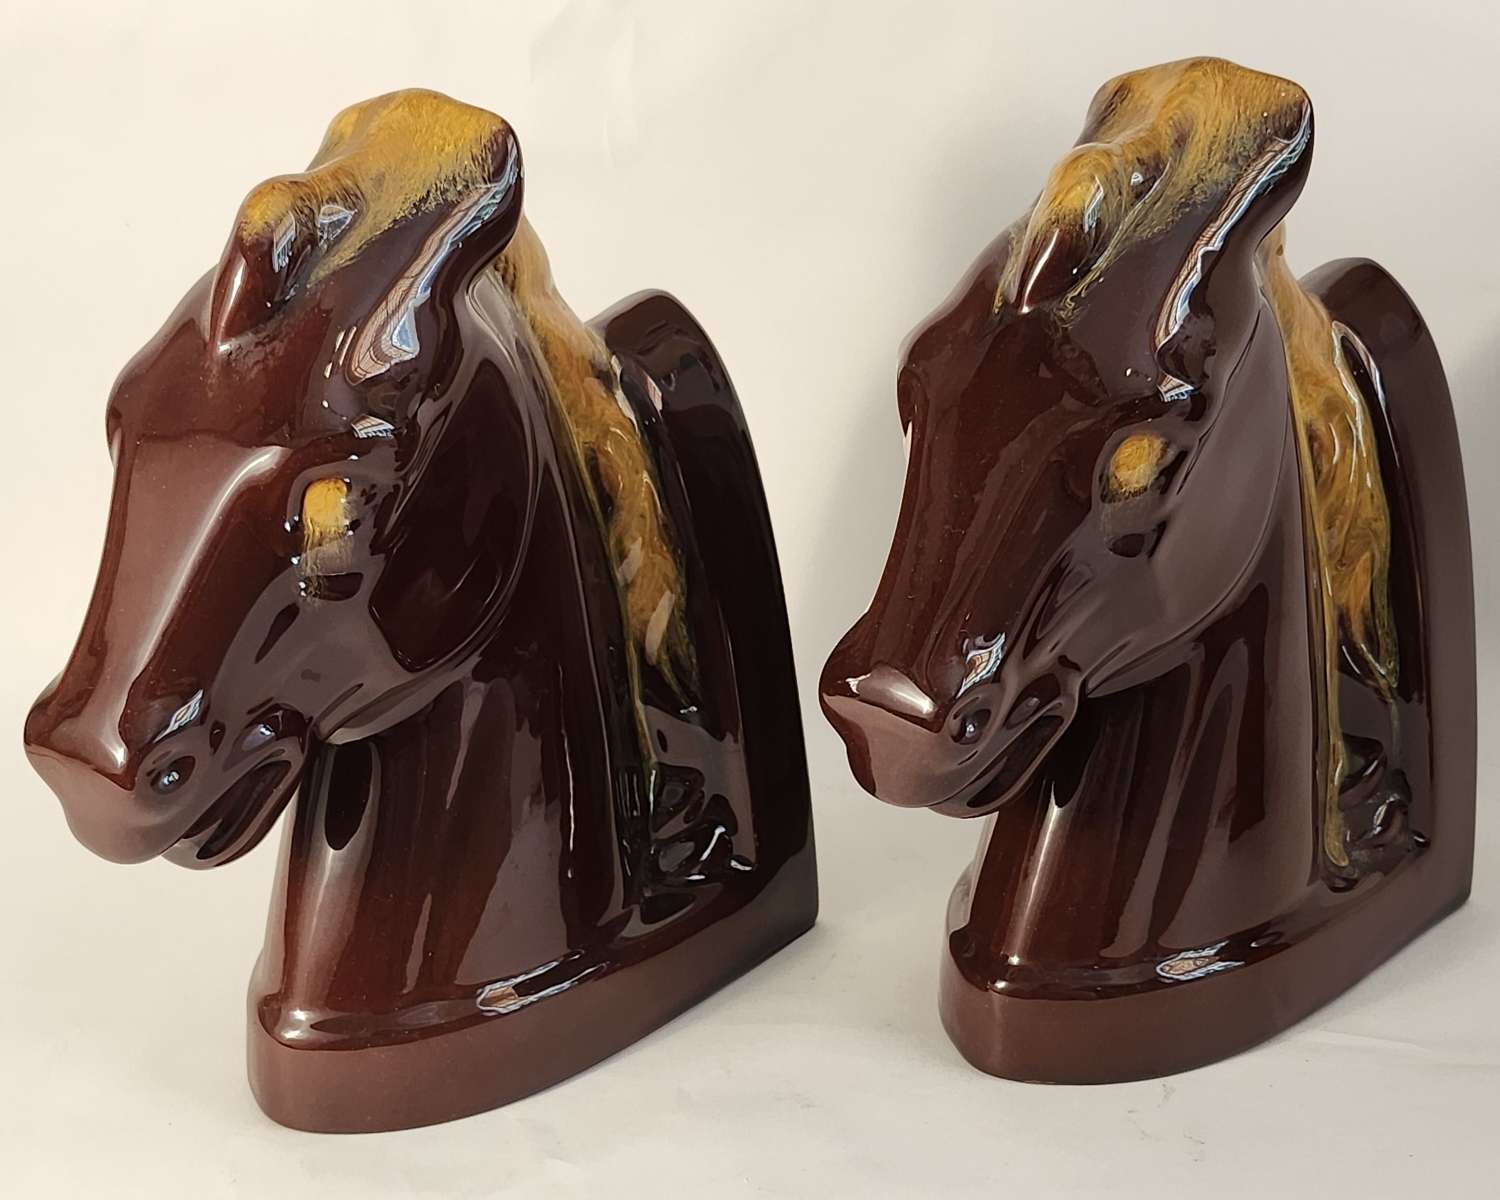 Pair of Pottery Horse Bookends